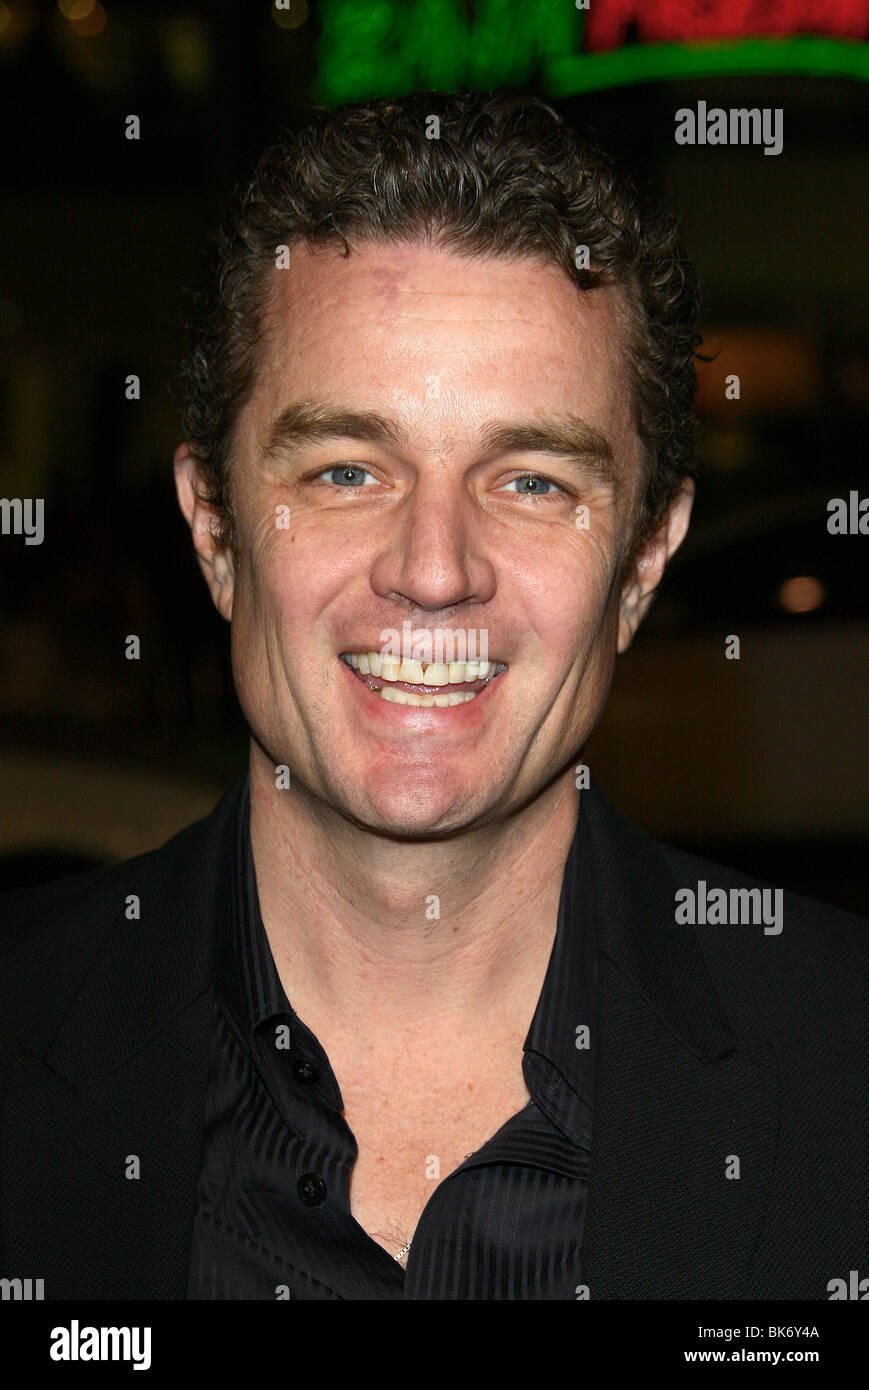 JAMES MARSTERS P.S. I LOVE YOU FILM PREMIERE GRAUMANS CHINESE HOLLYWOOD LOS ANGELES USA 09 décembre 2007 Banque D'Images